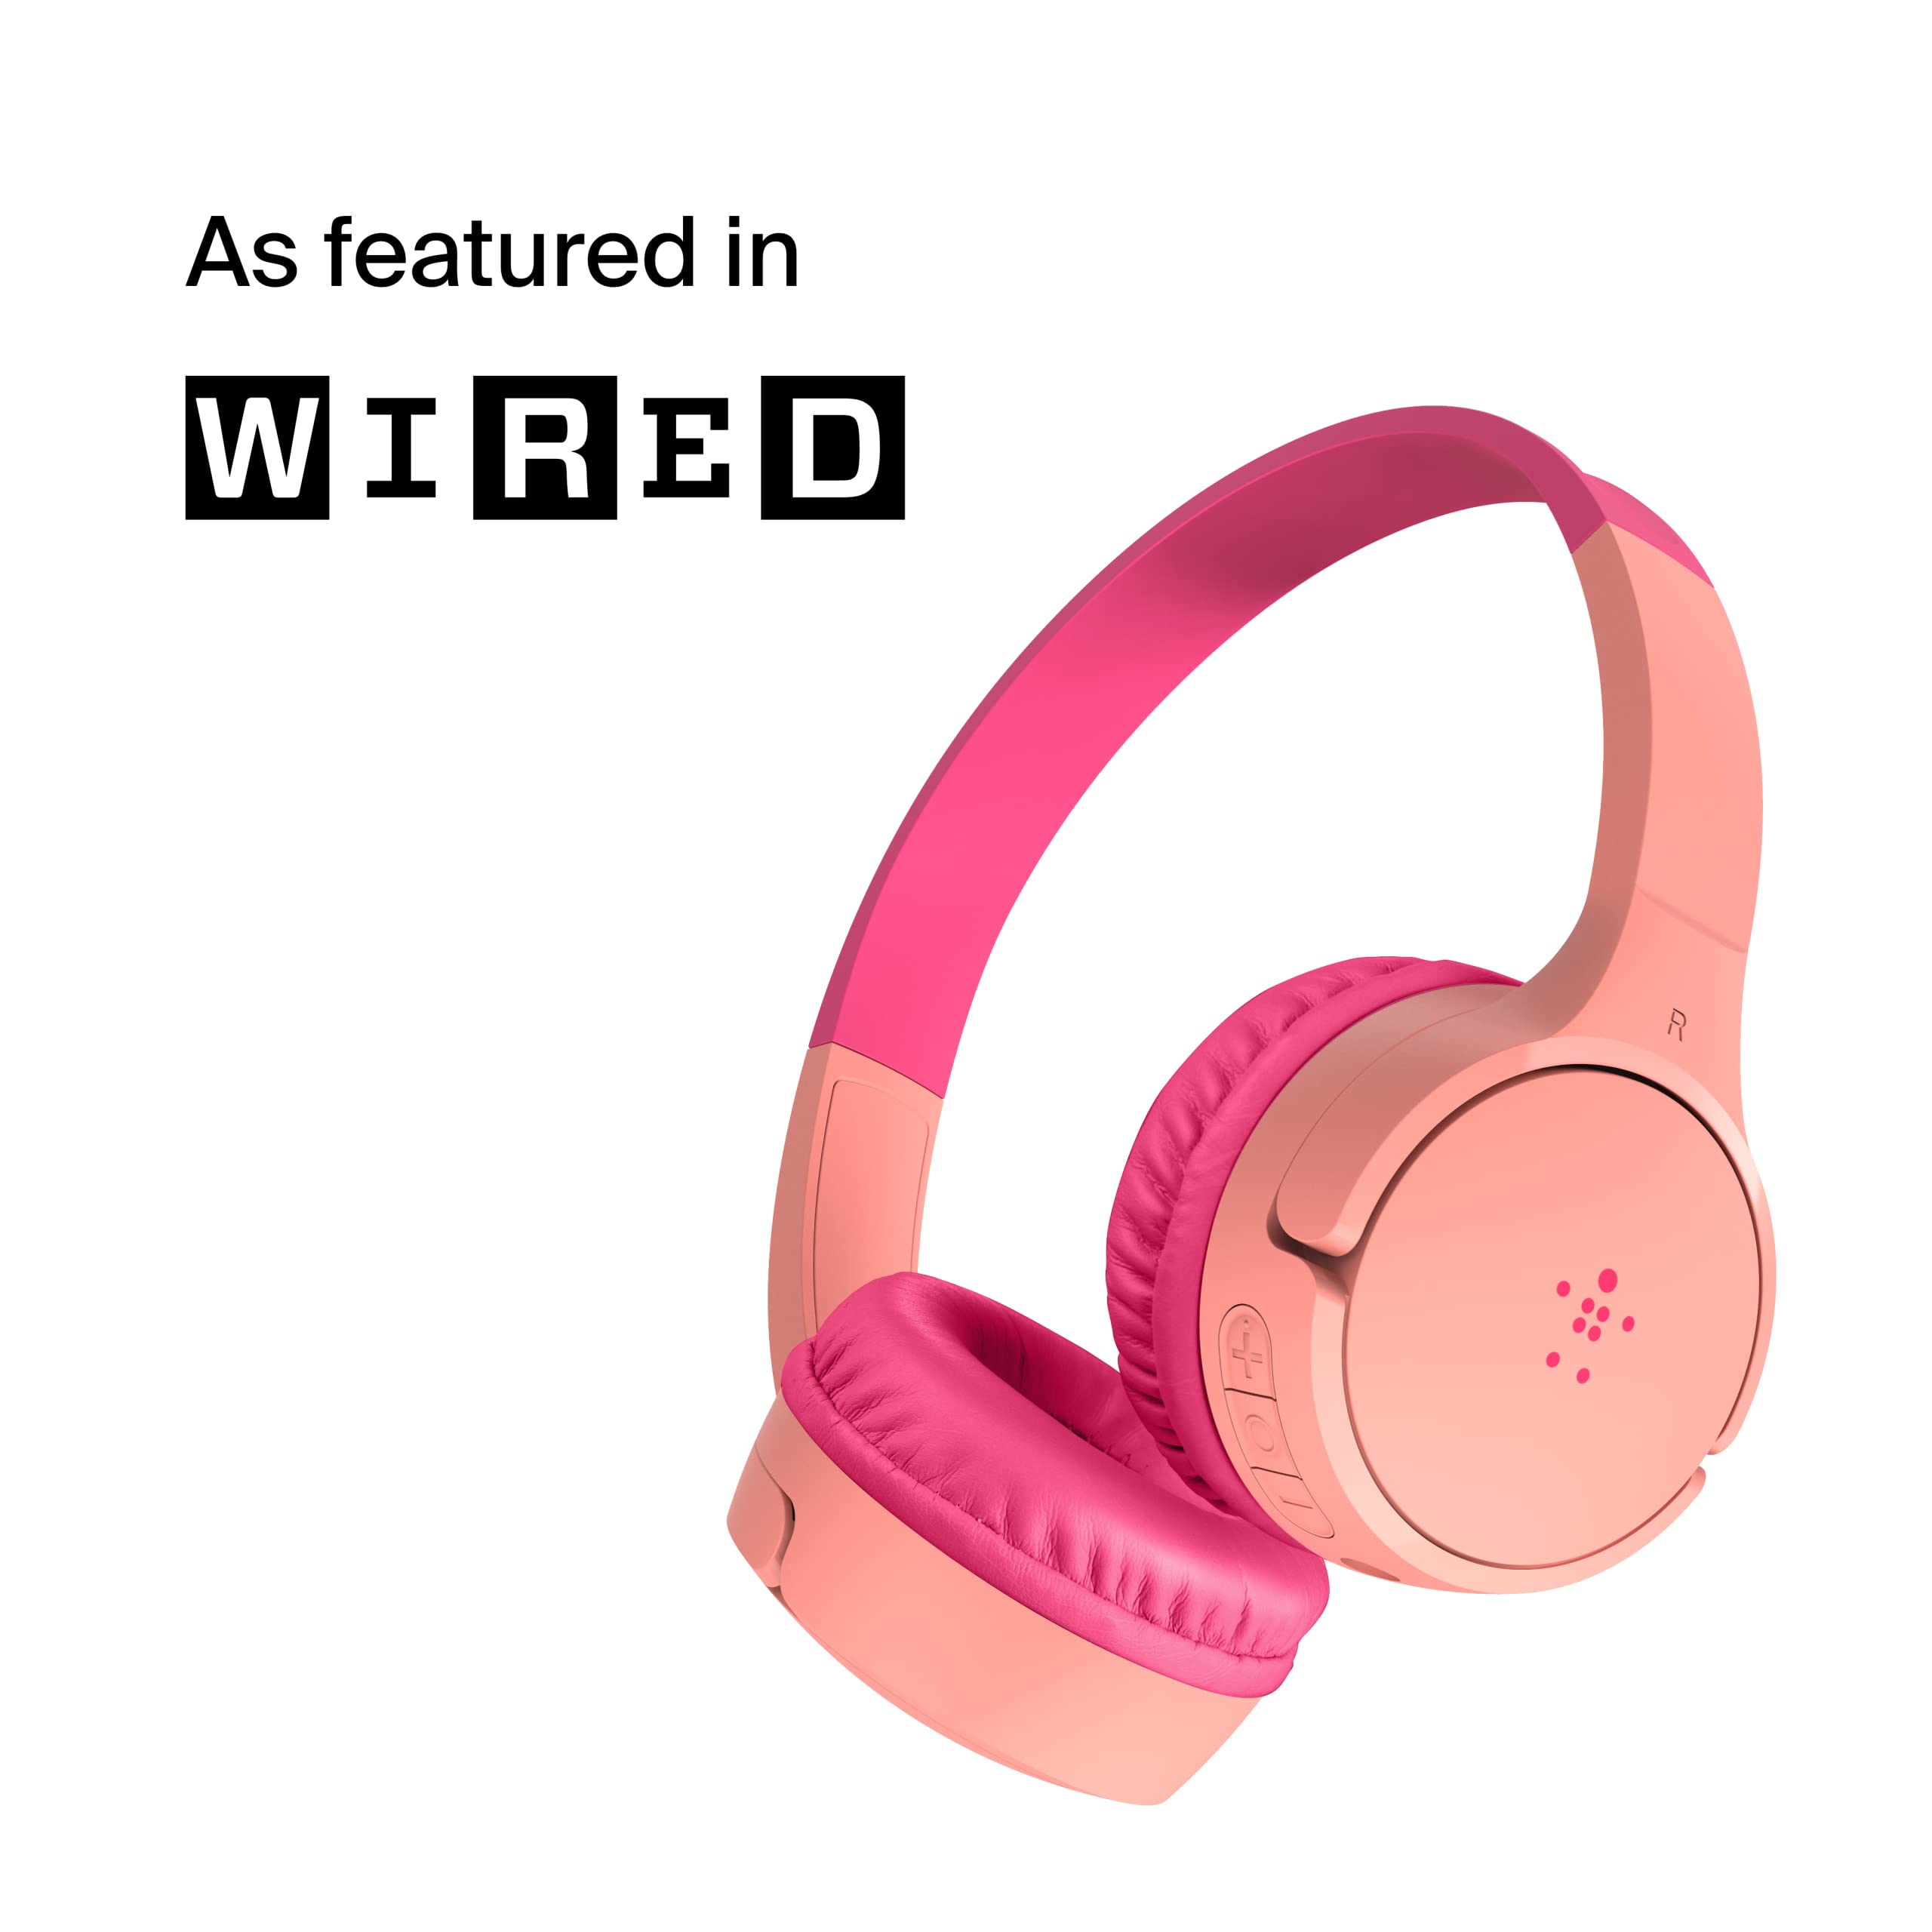 Belkin SoundForm Mini - Wireless Bluetooth Headphones For Kids with Built In Microphone - On-Ear Earphones for iPhone, iPad, Fire Tablet & more - Pink